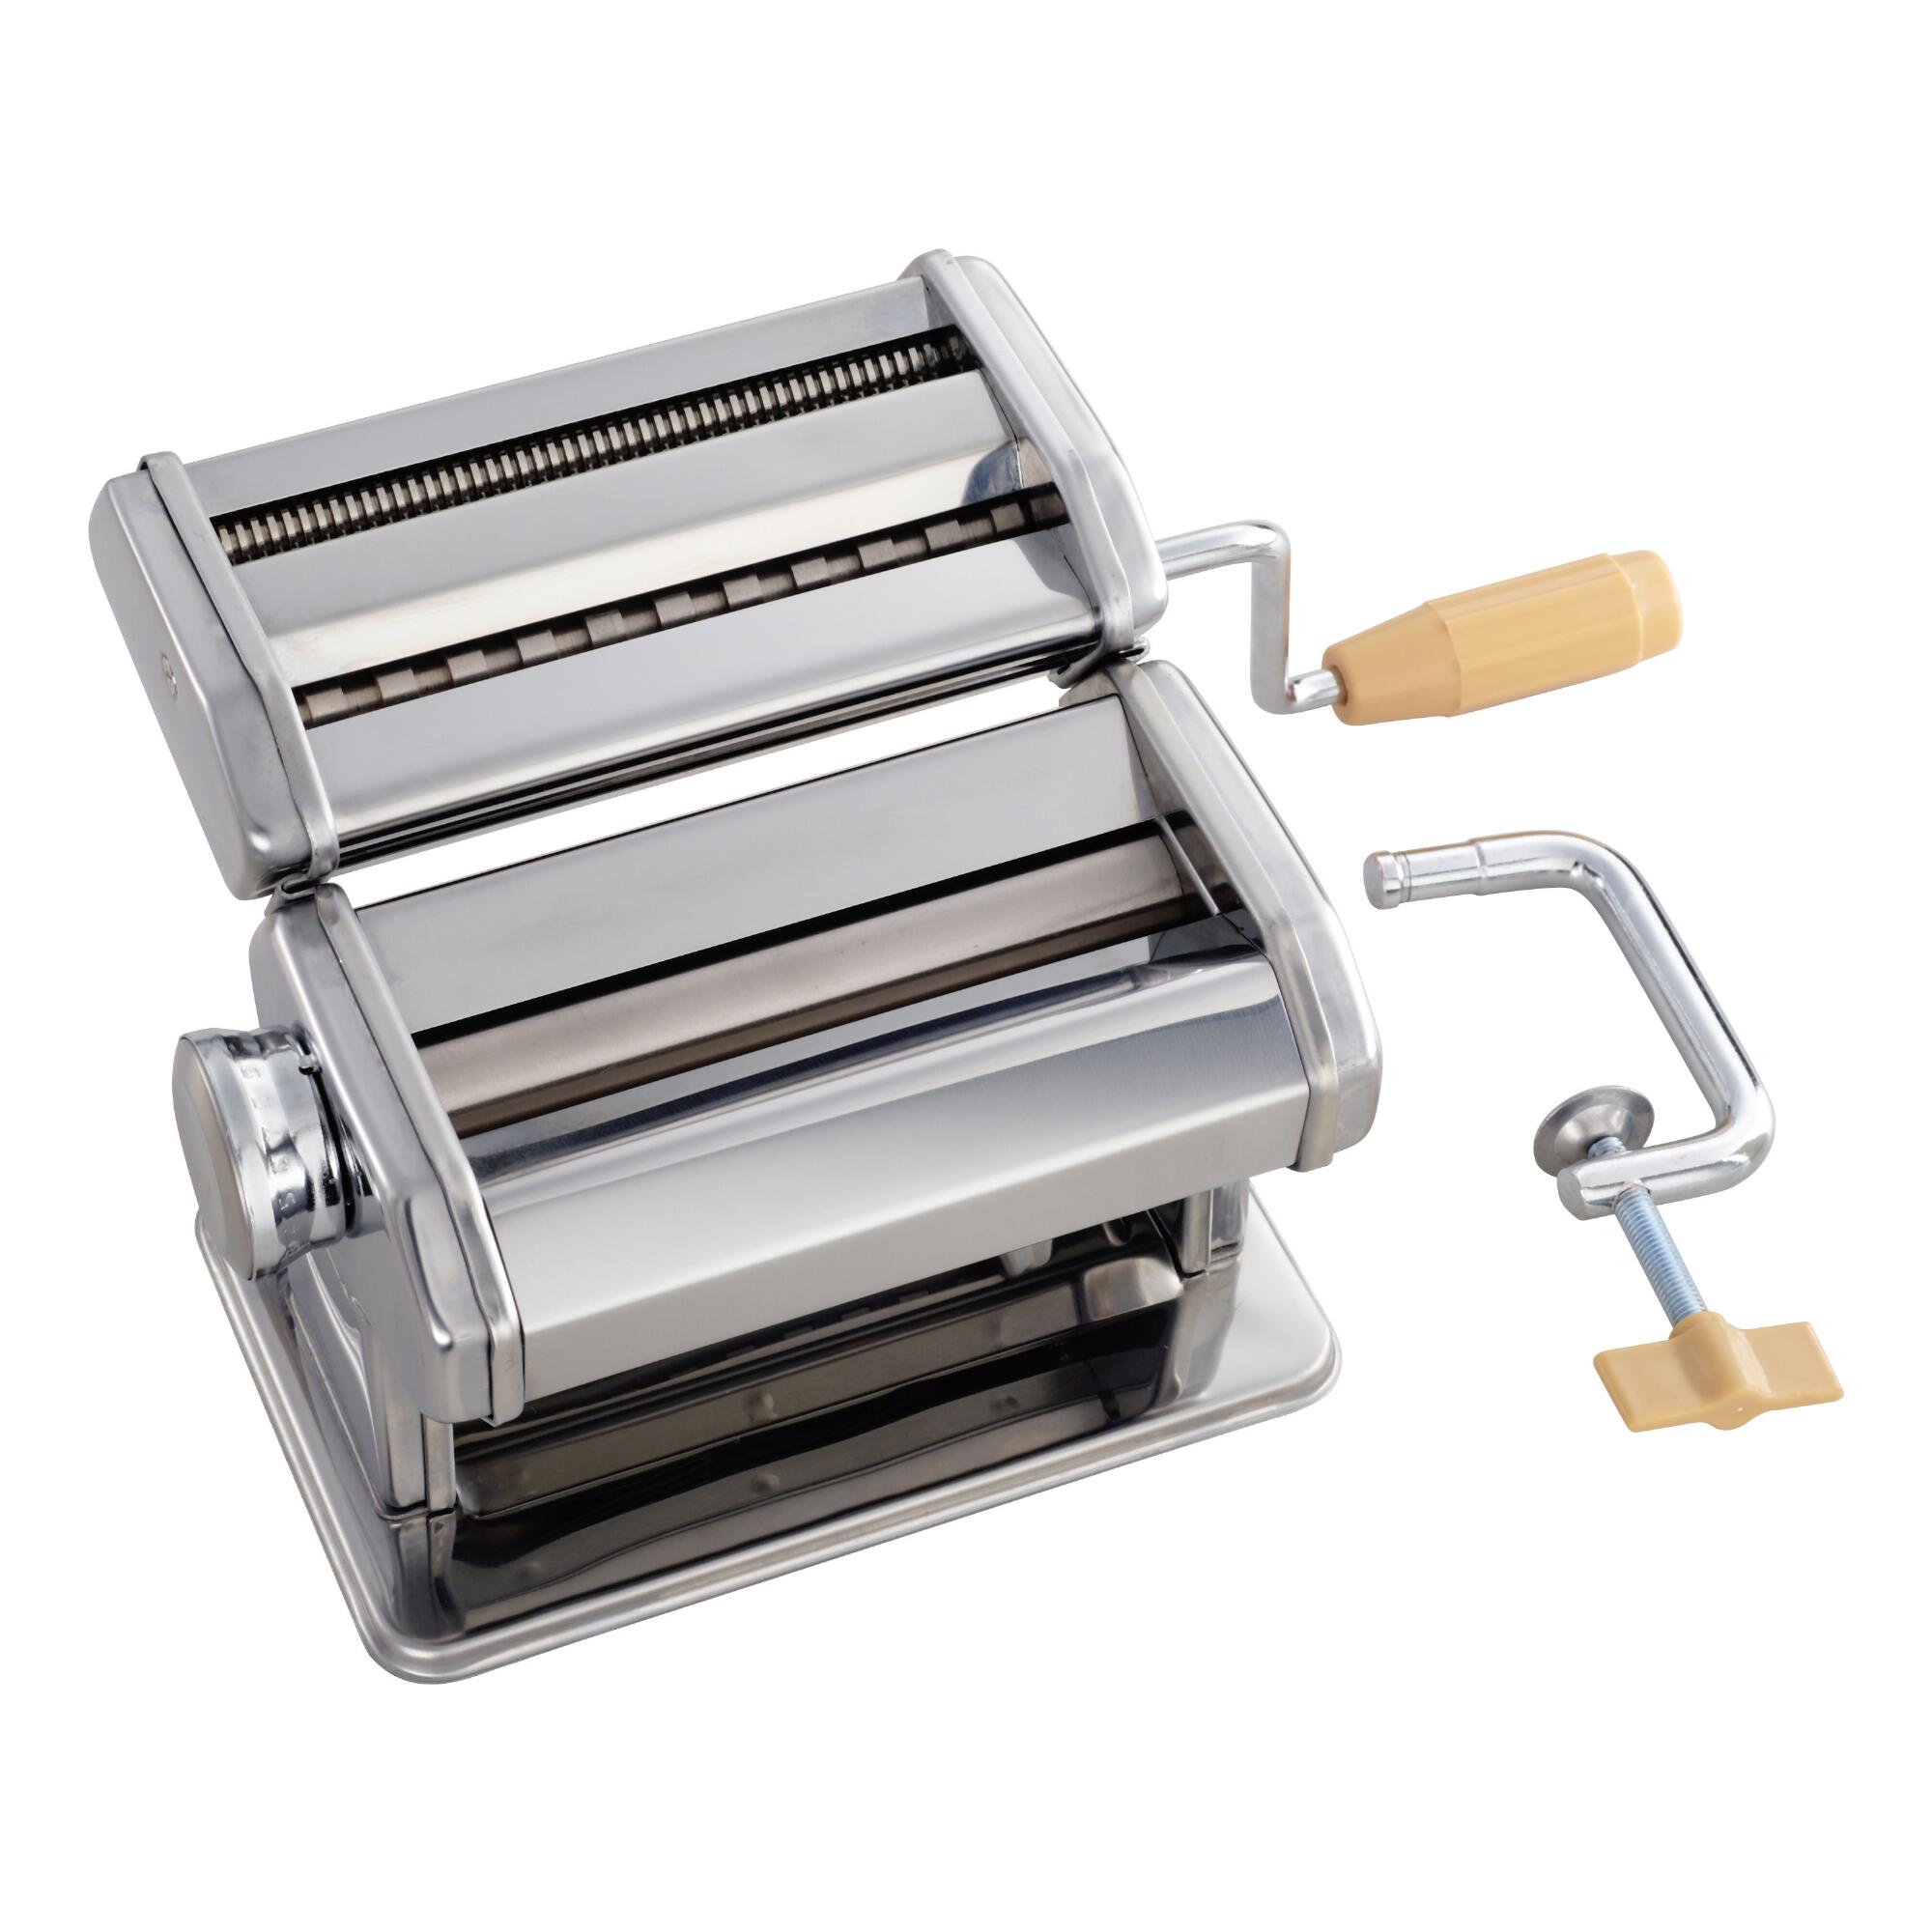 Norpro Stainless Steel Manual Pasta Maker: Silver by World Market